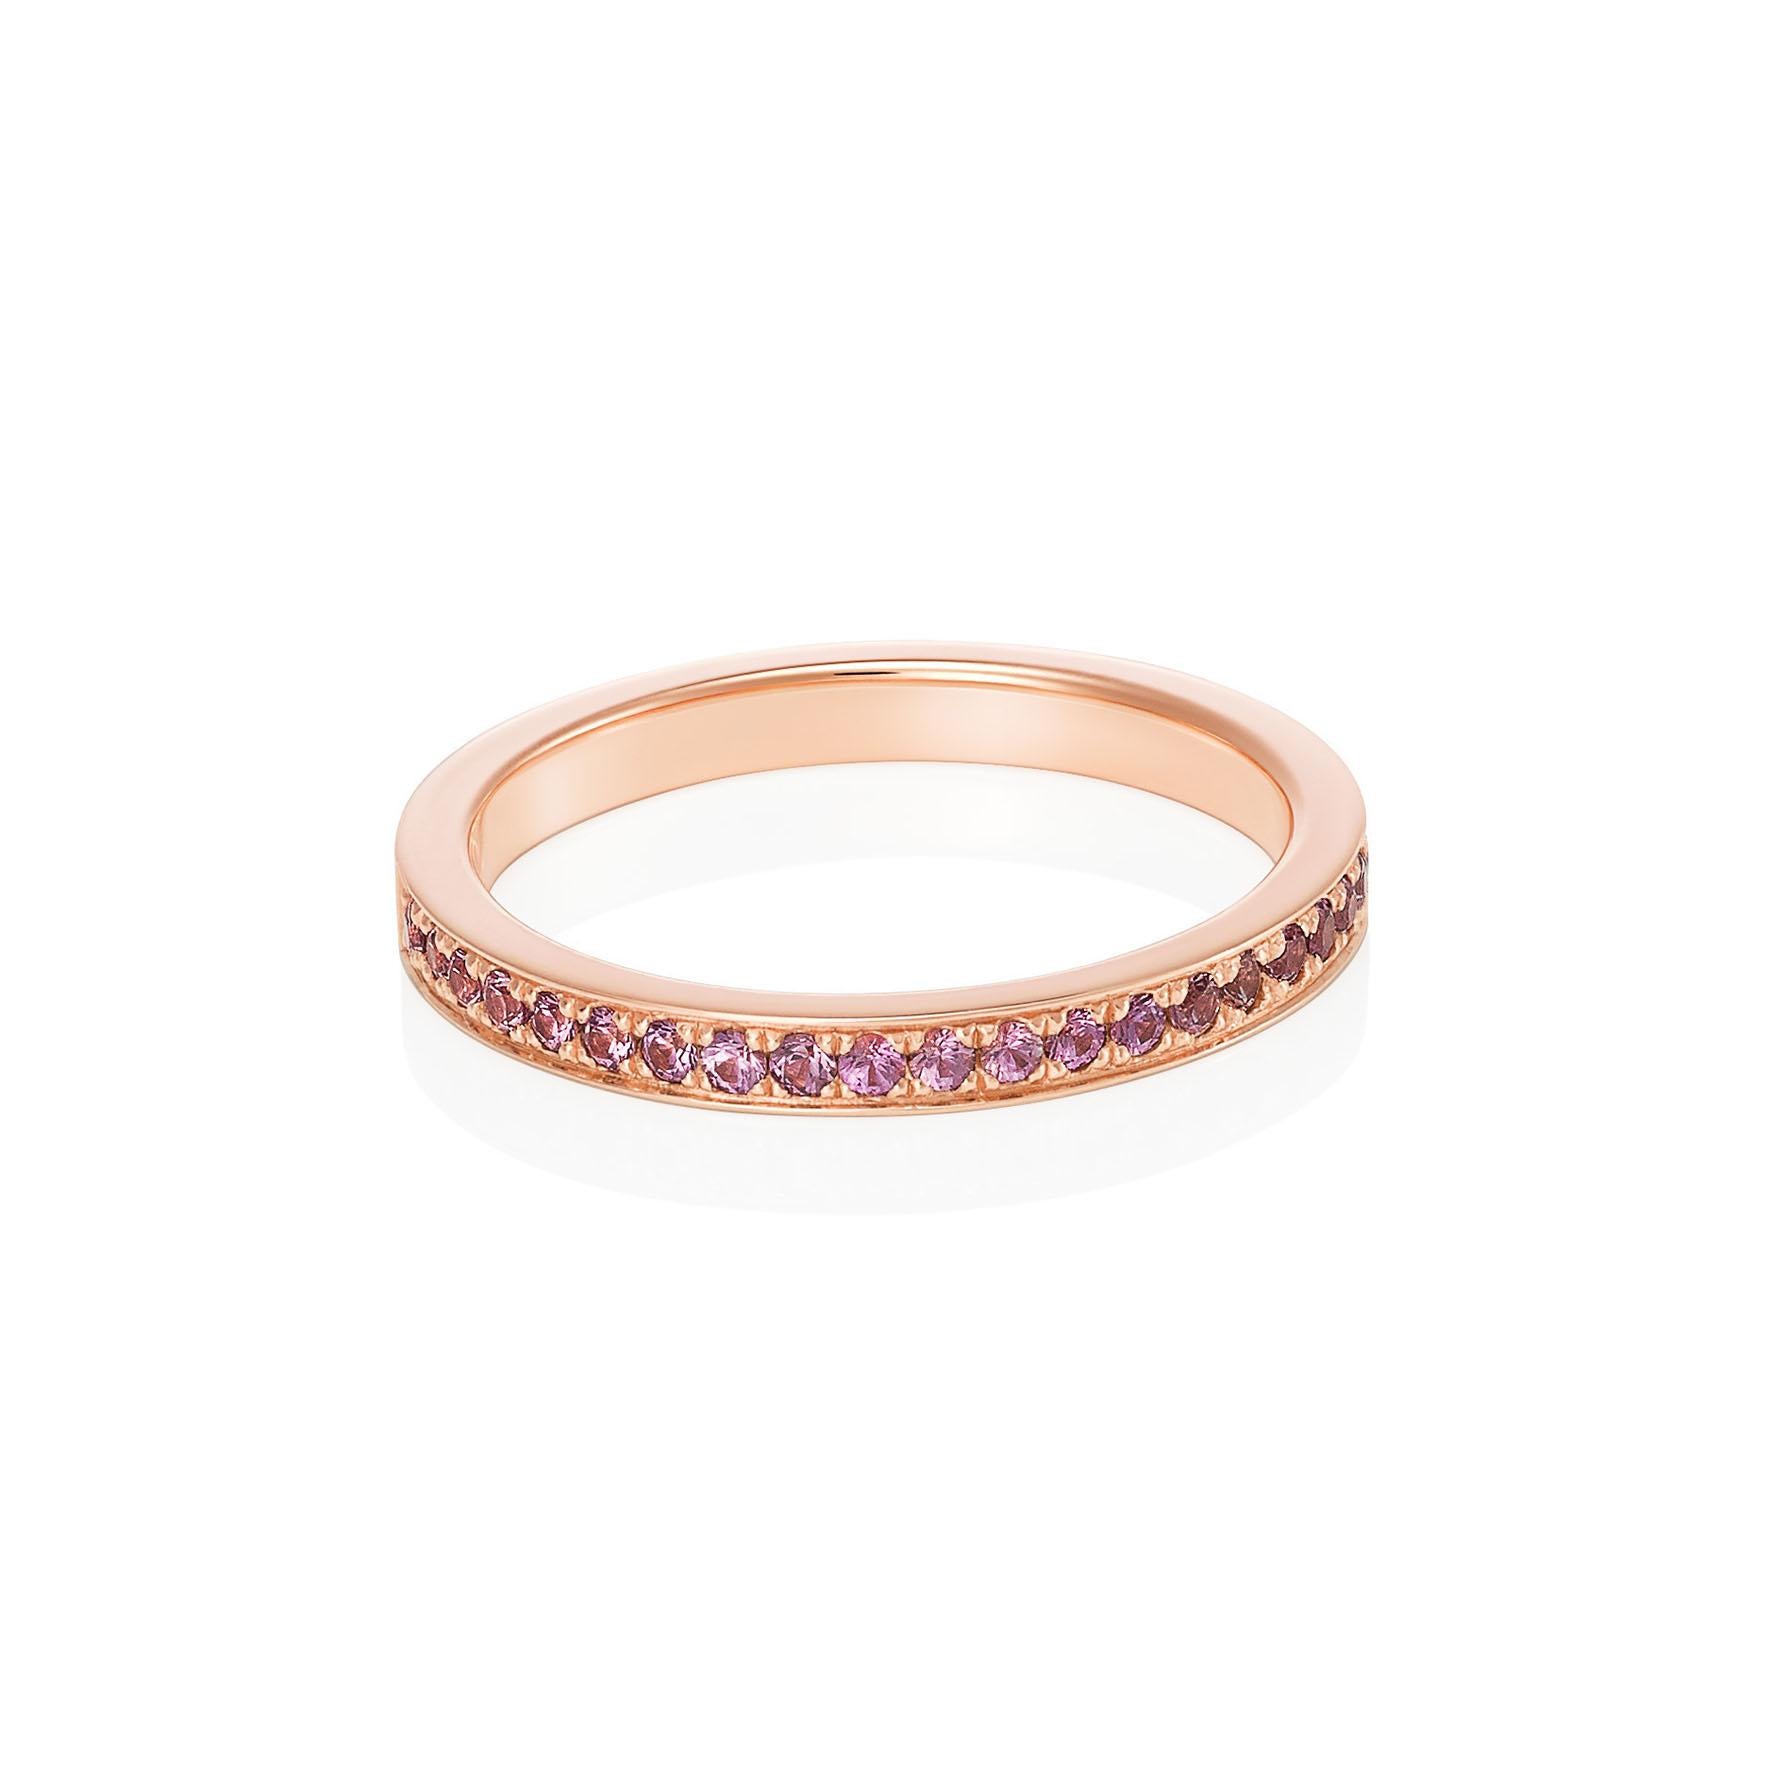 Giulians 18 karat rose gold and pink sapphire pave set ring. This ring features 26 round brilliant cut pink sapphires pave set in a single line to two thirds around, with a total weight of 0.29 carats.  The band measures 2.3mm in width and 1.65mm in